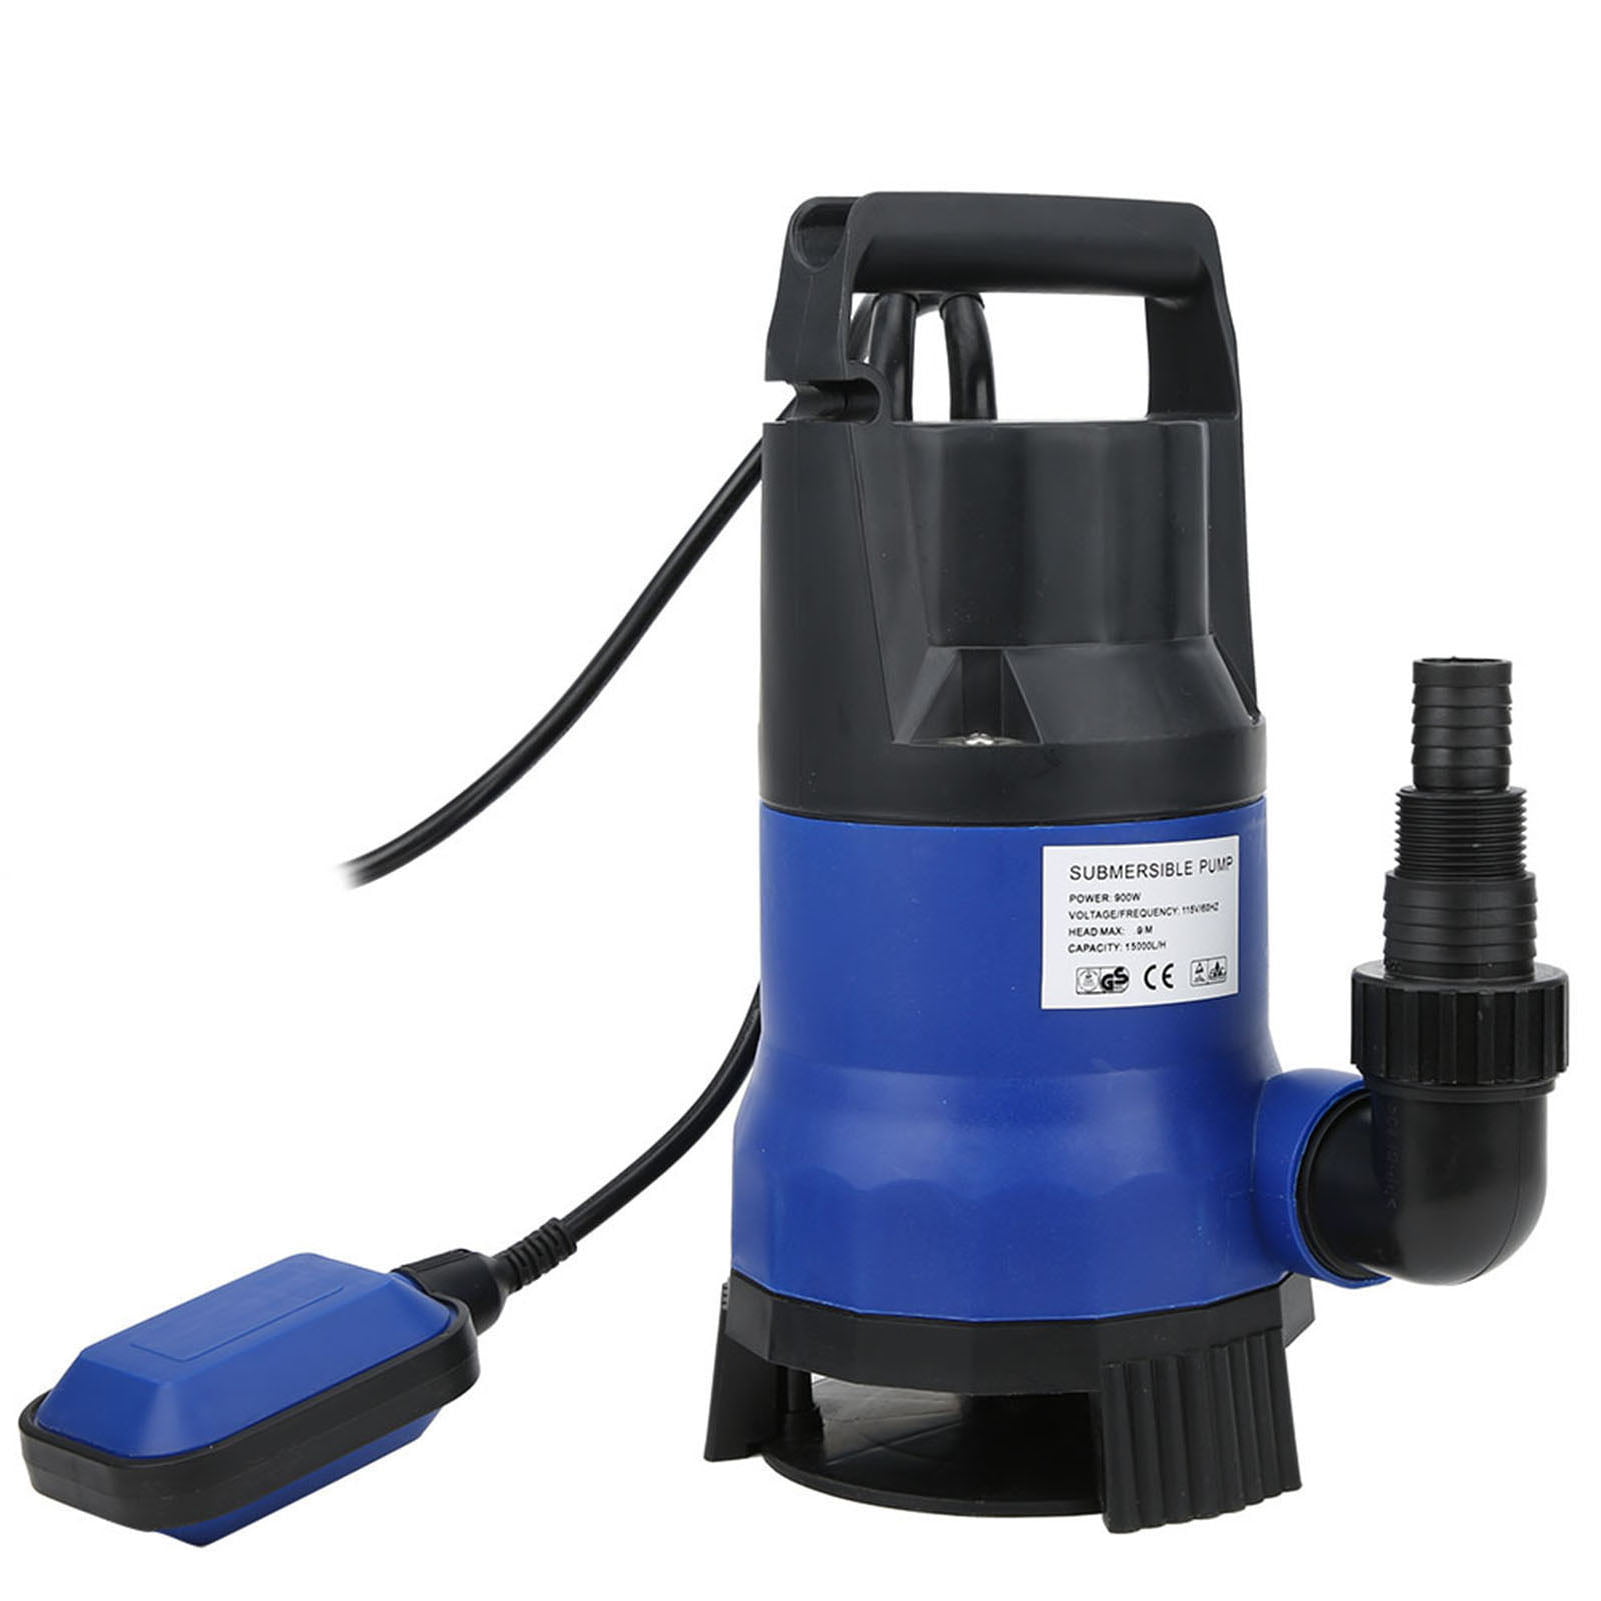 US Plug 110V 900W Water Pump Submersible Sewage Sump Aeration Dirty with Built-in Float Switch for Swim Pool Electric Power Tools Blue 